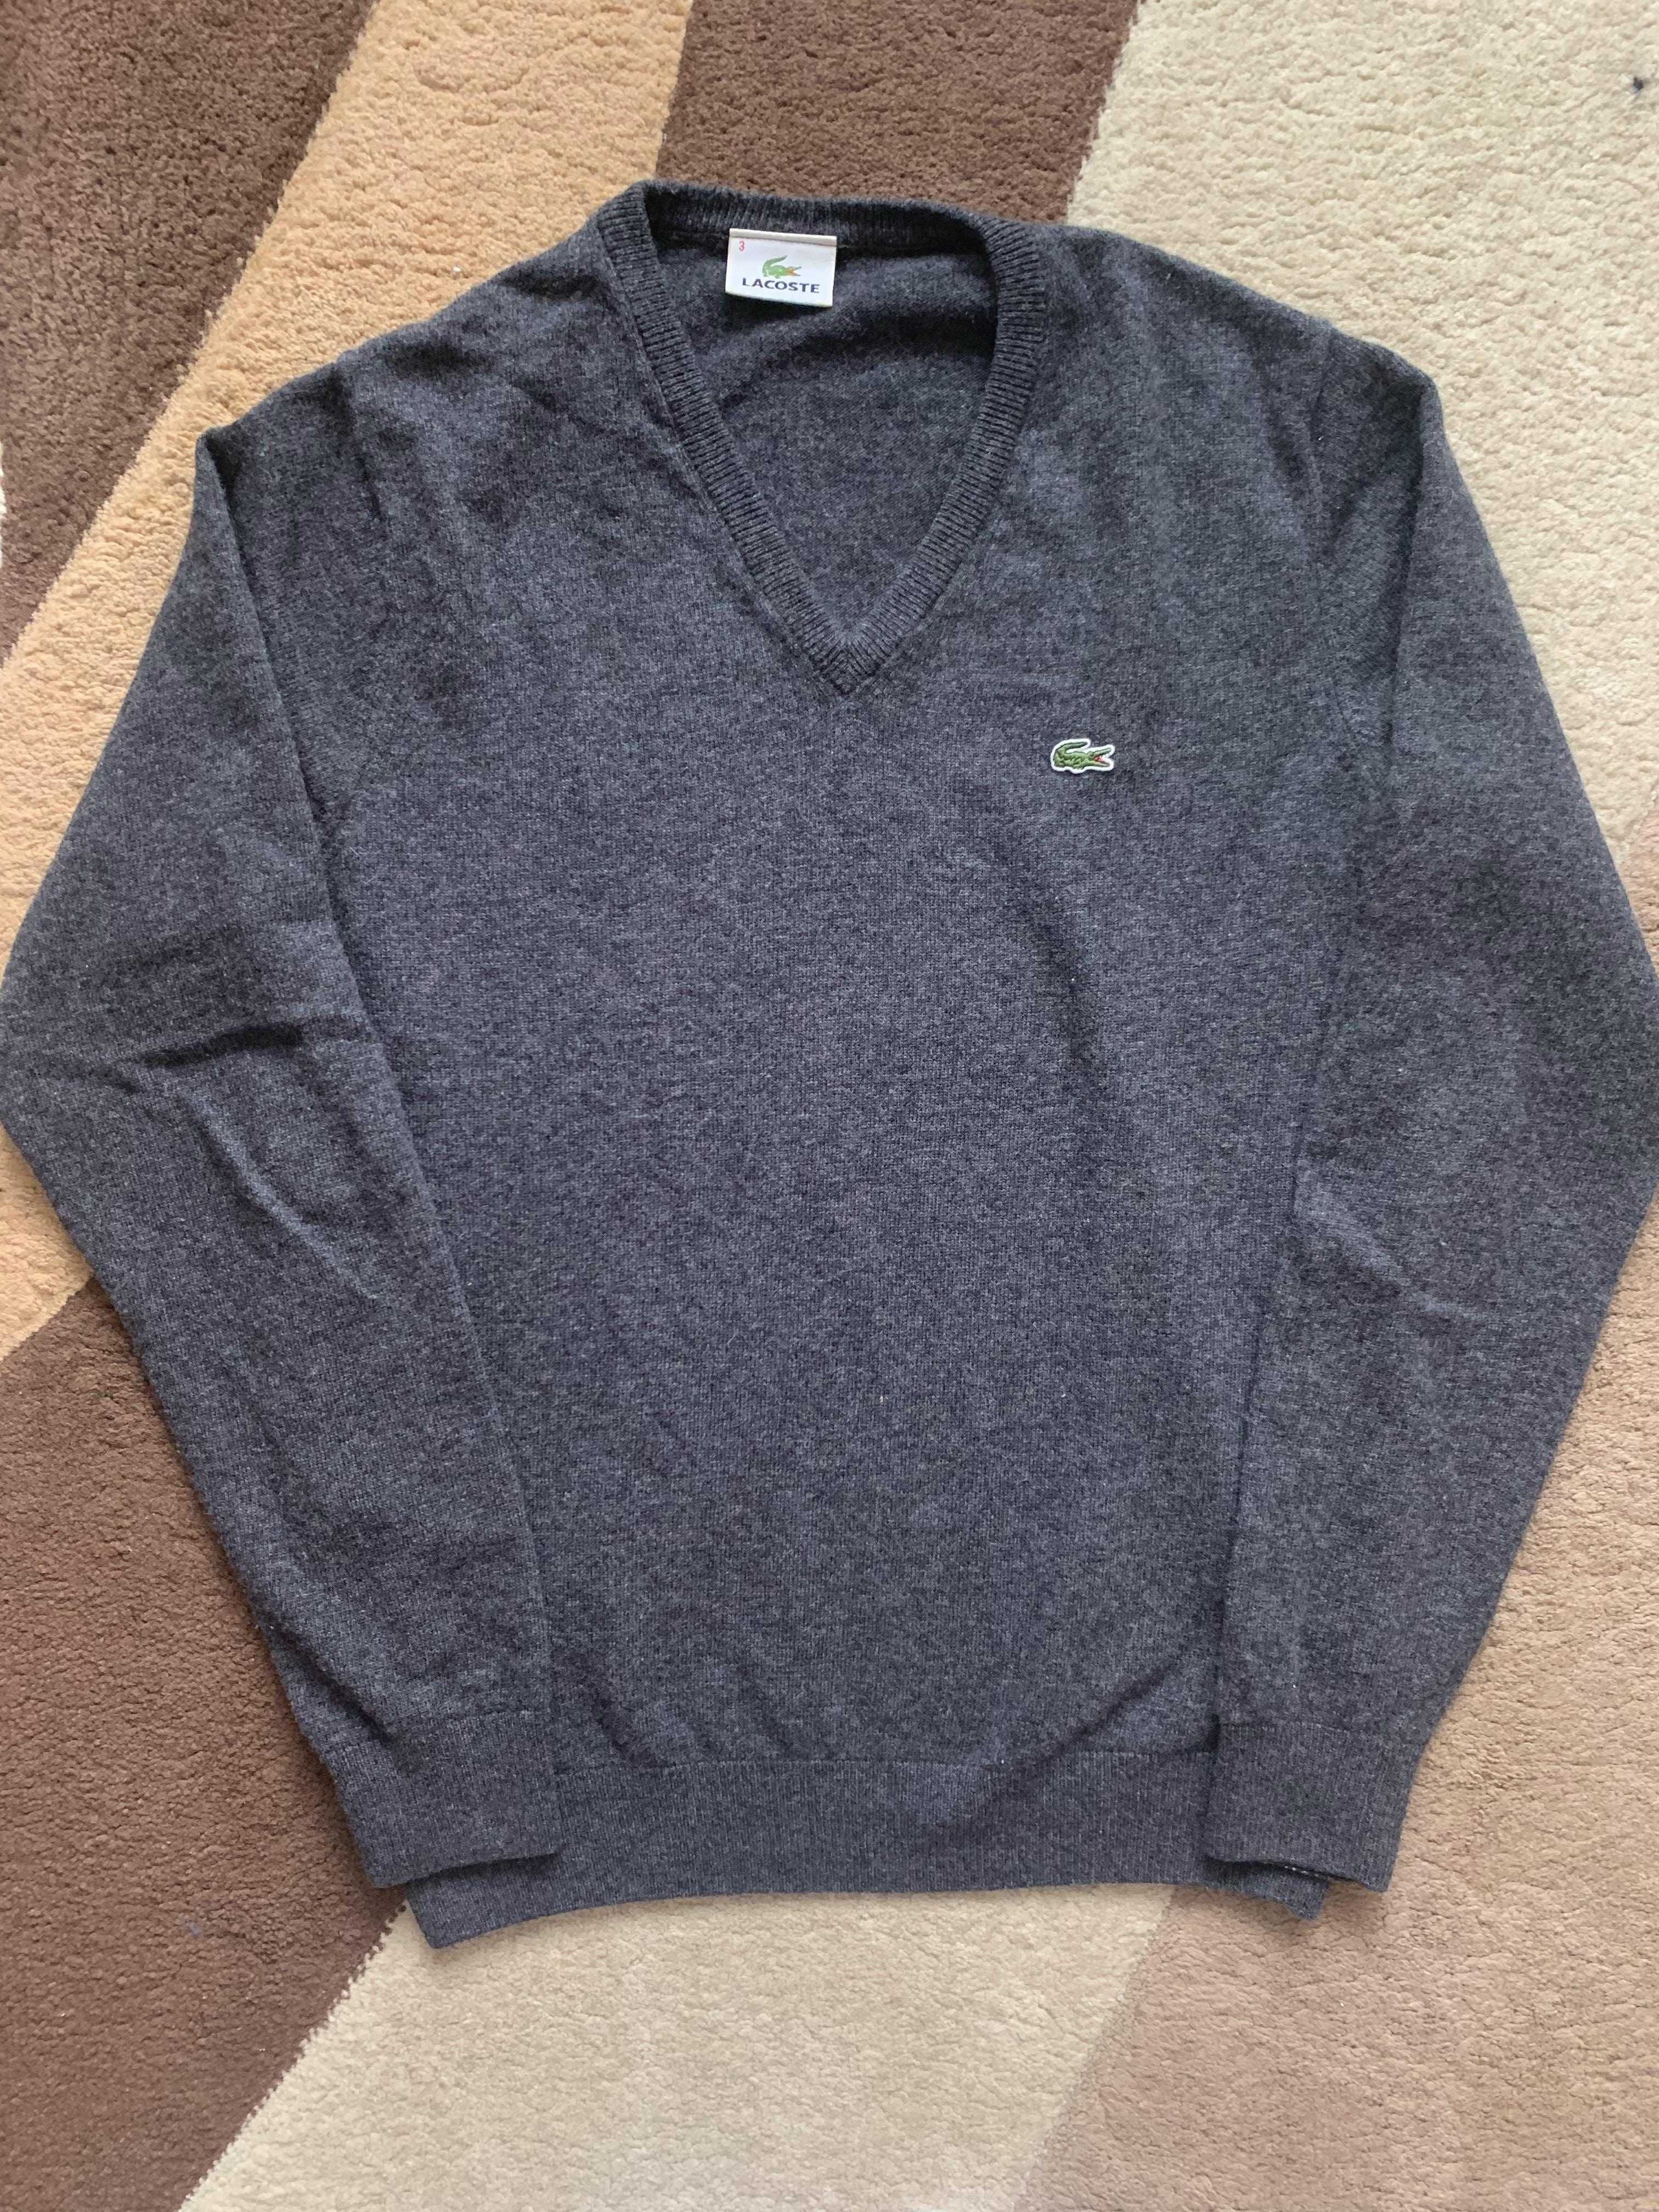 Pulover Lacoste Vintage Lana 100% Wool Clasic Old Money